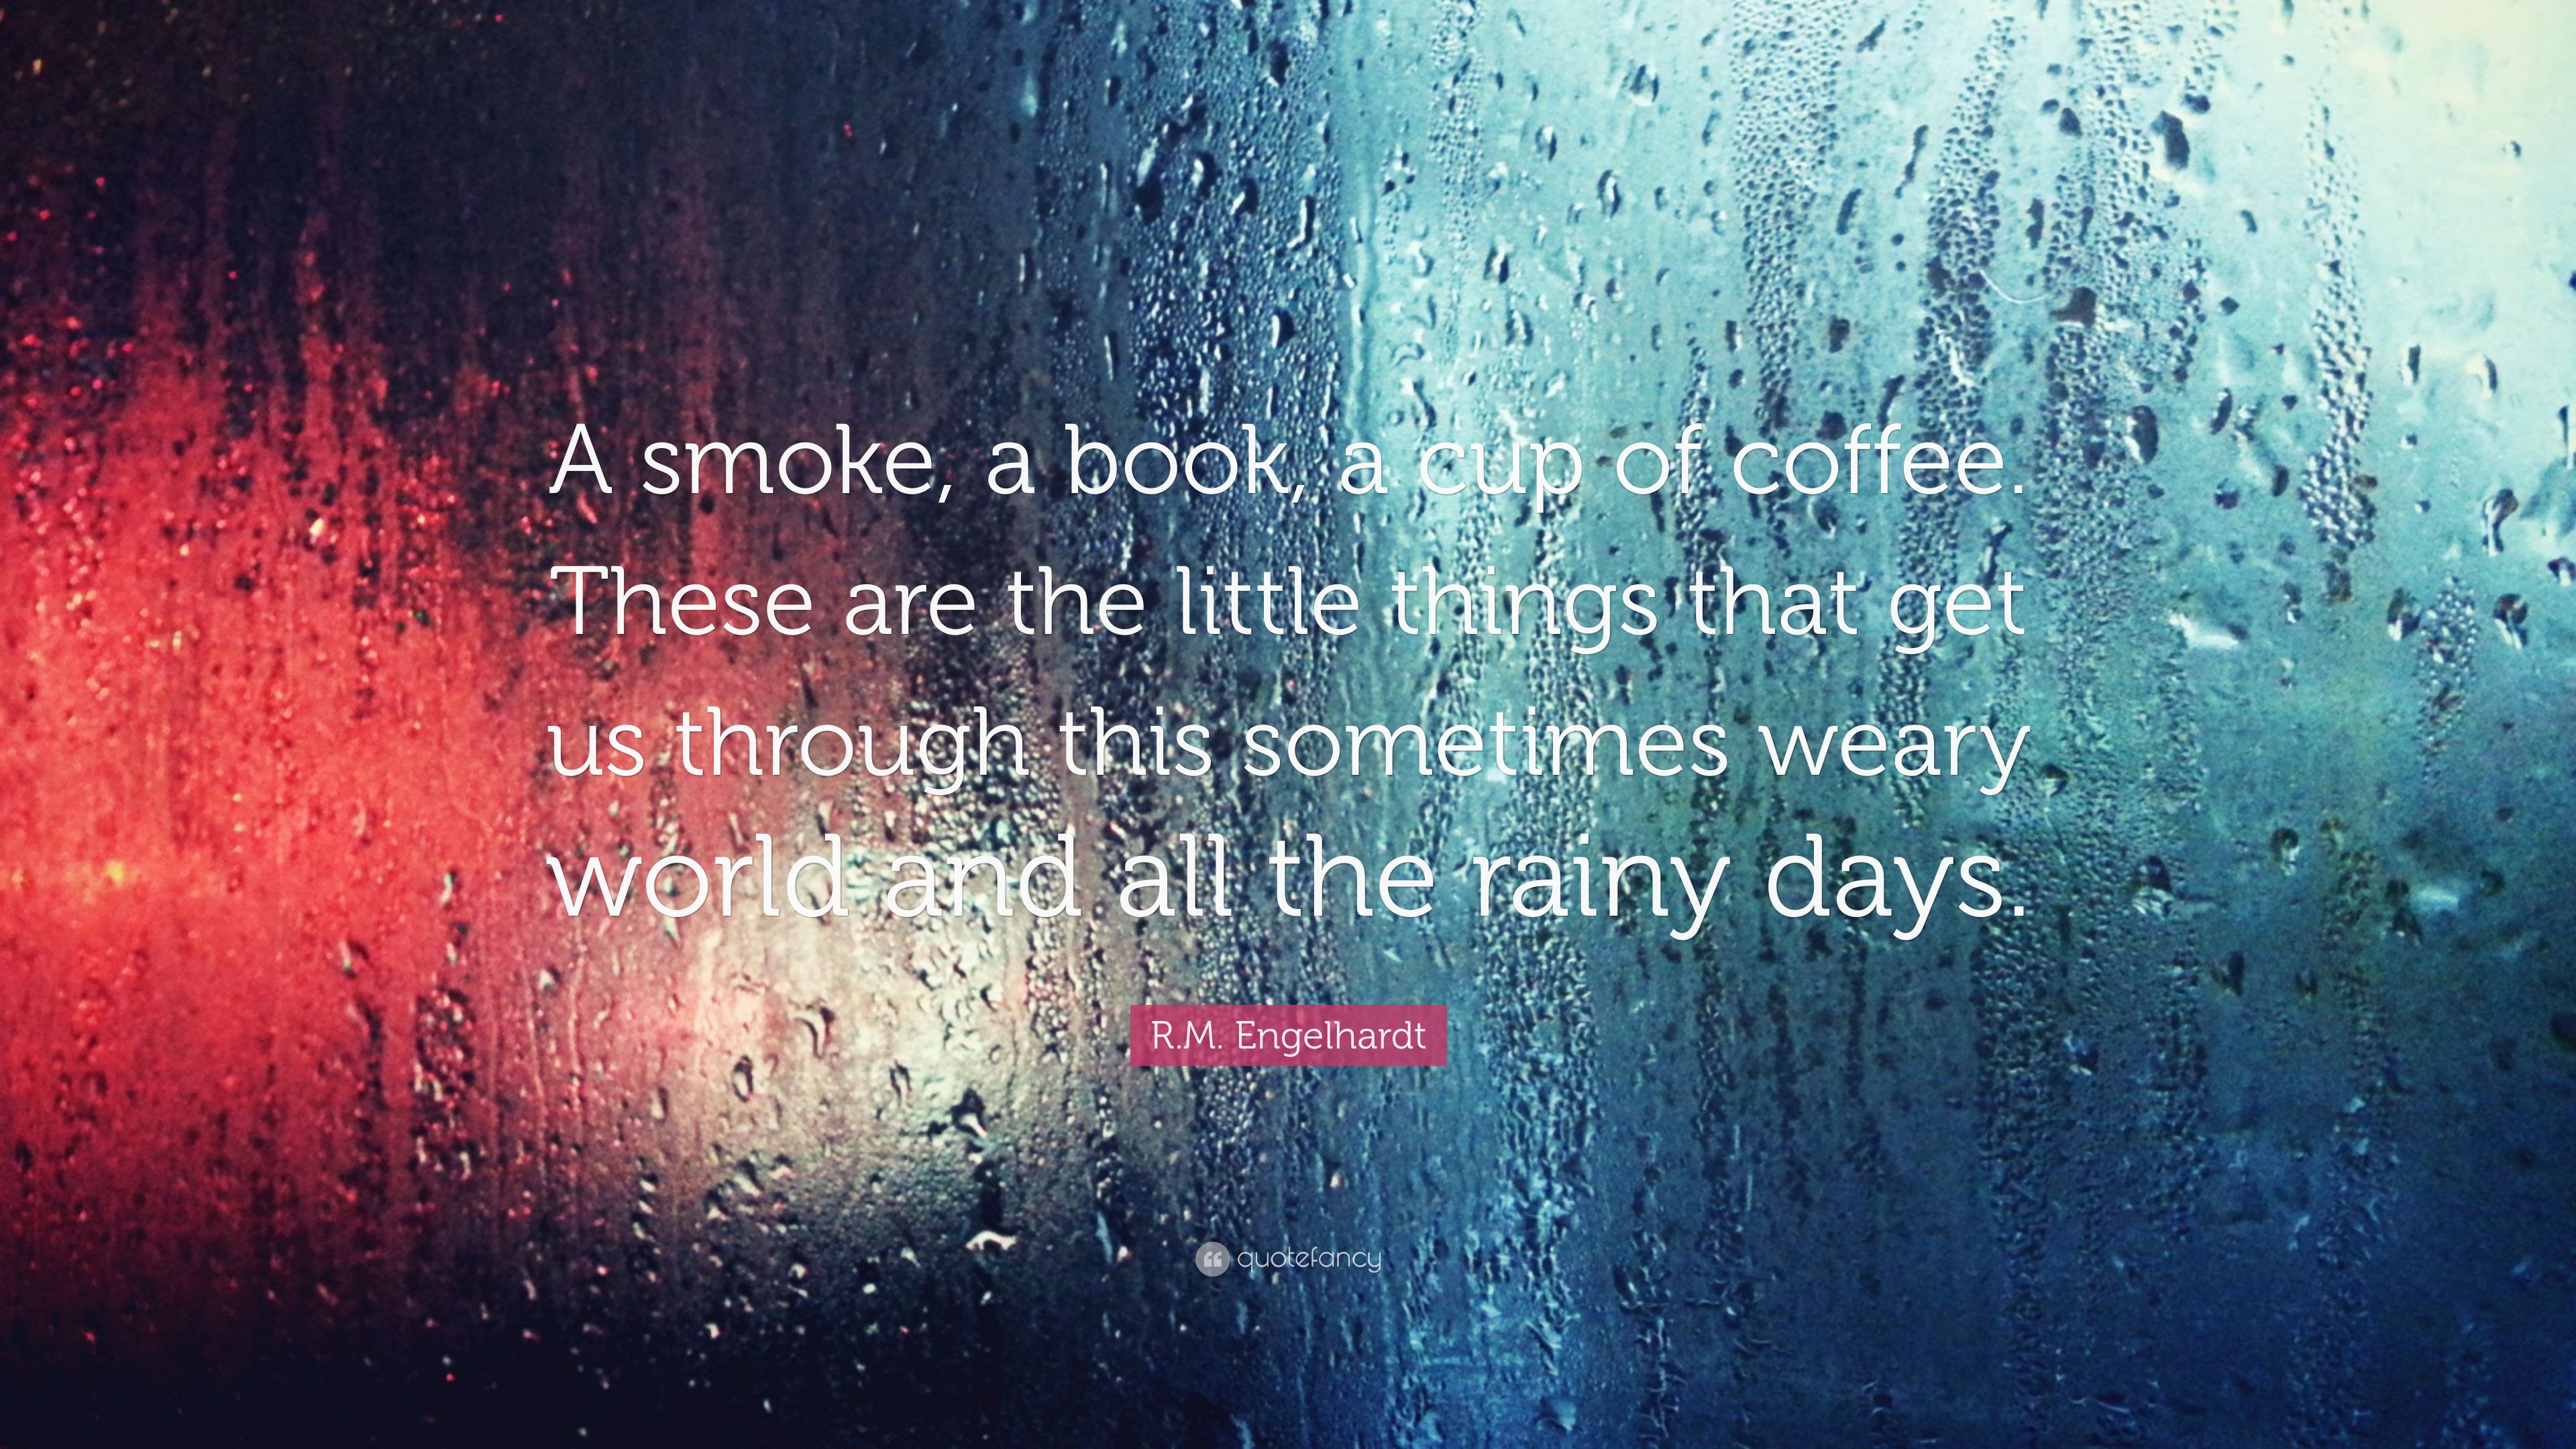 R.M. Engelhardt Quote: “A smoke, a book, a cup of coffee. These are the little things that get us through this sometimes weary world and all the.” (7 wallpaper)